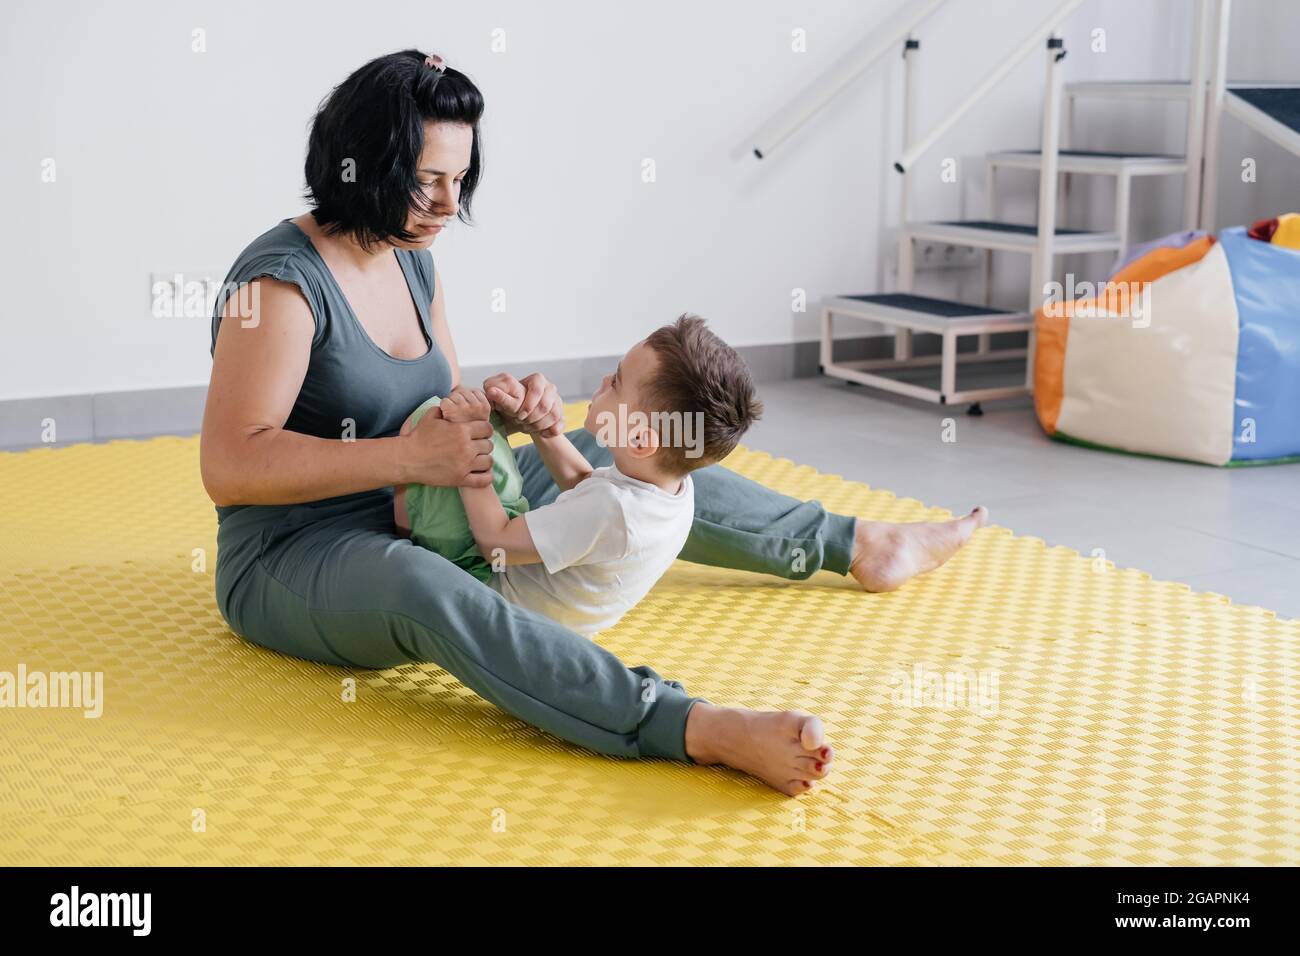 Rehabilitation of child with cerebral palsy in special center. Mother doing physical exercises and happily playing with boy, Sport activities for Stock Photo